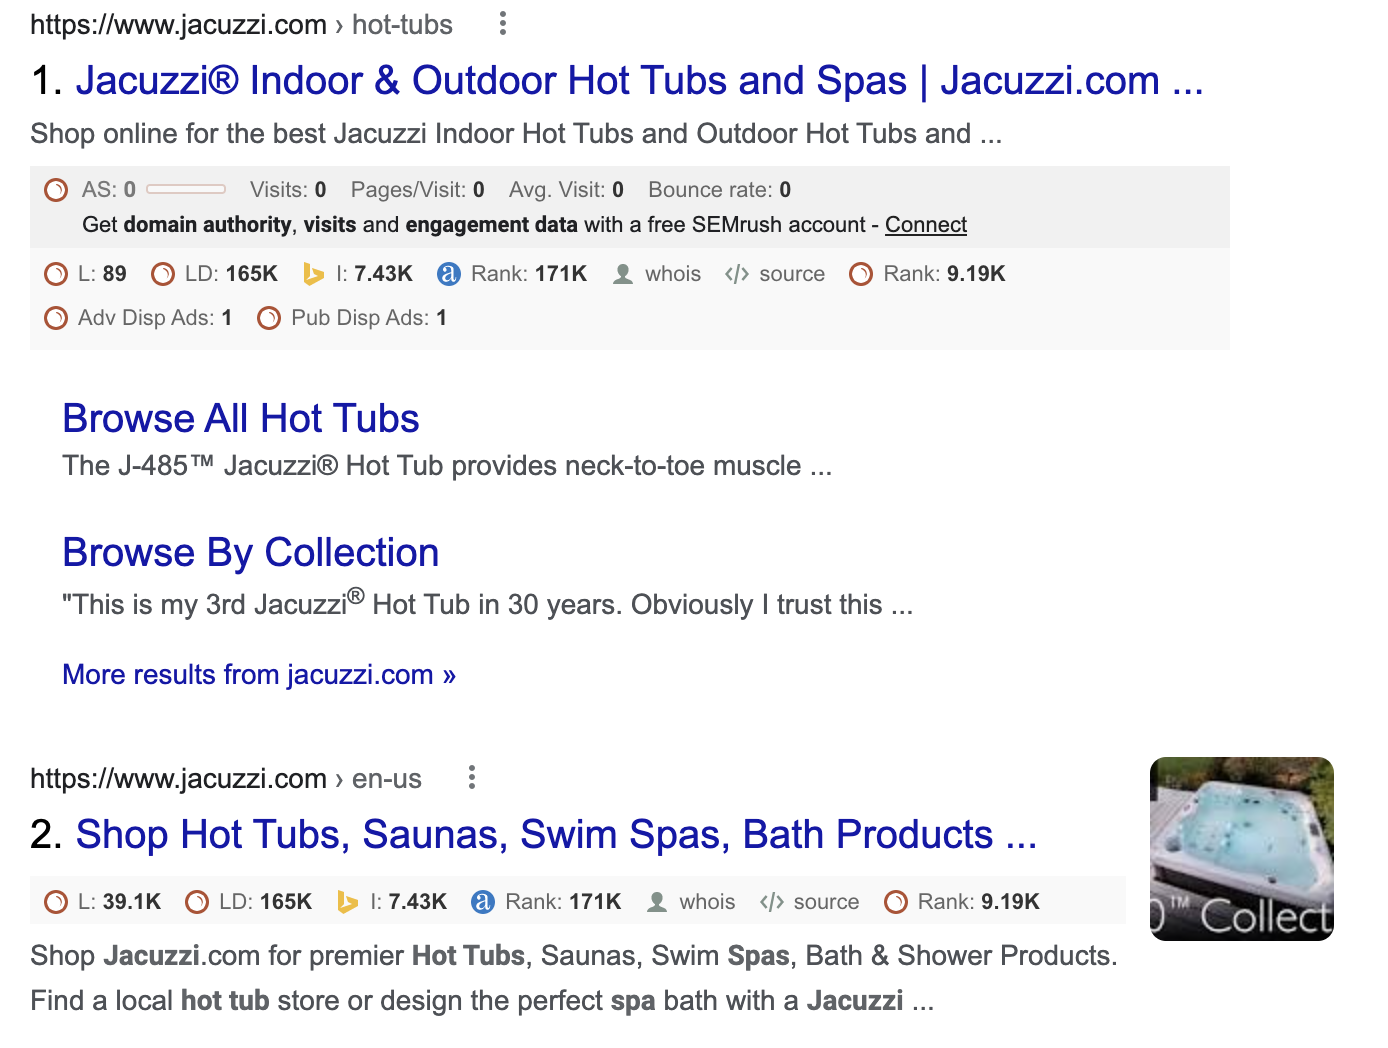 search results for "jacuzzi hot tub"